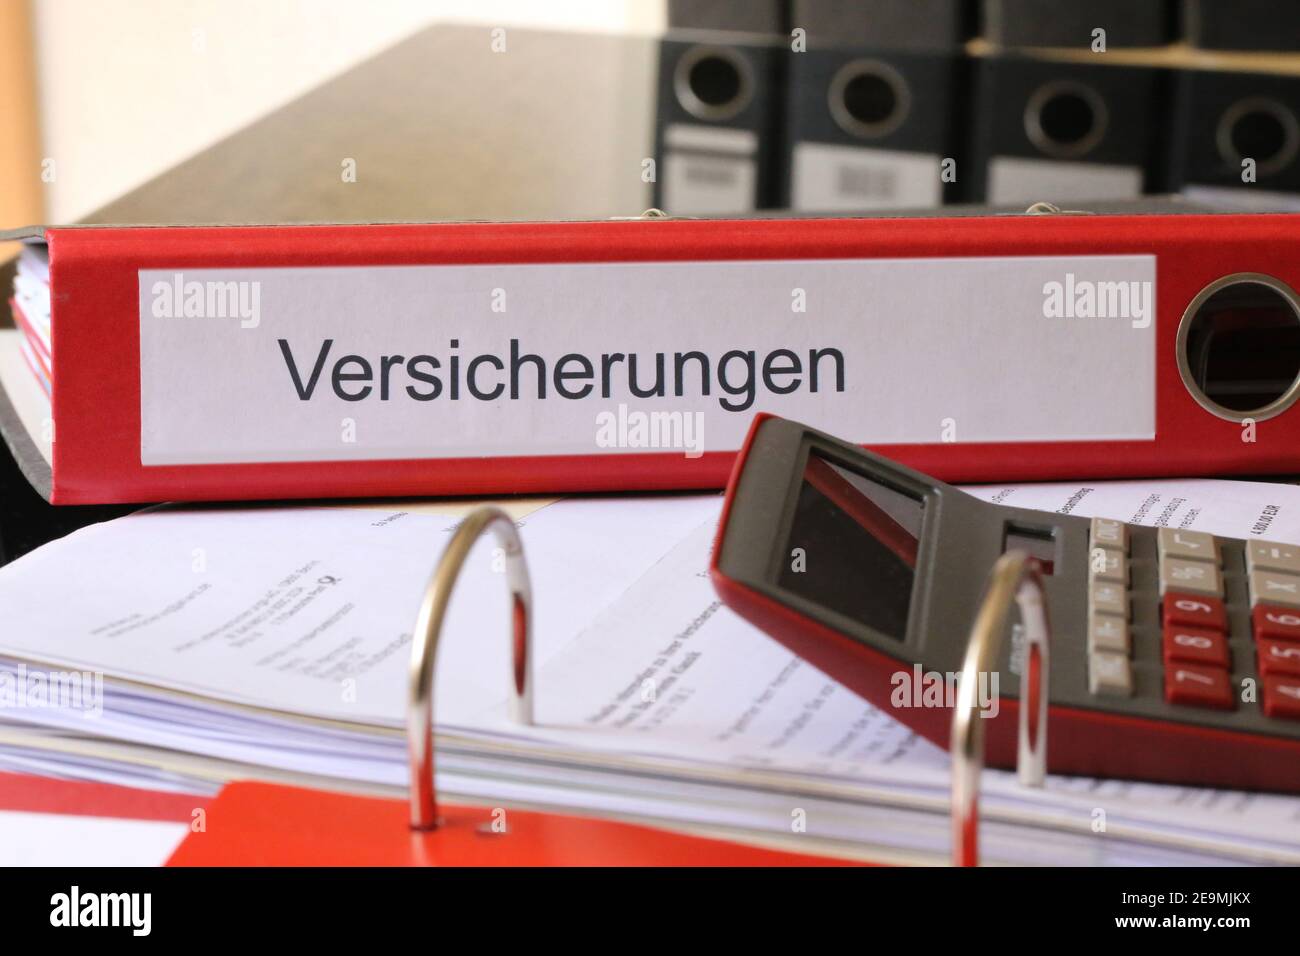 Symbol image: Folder with insurance policies and calculator on a desk (german) Stock Photo